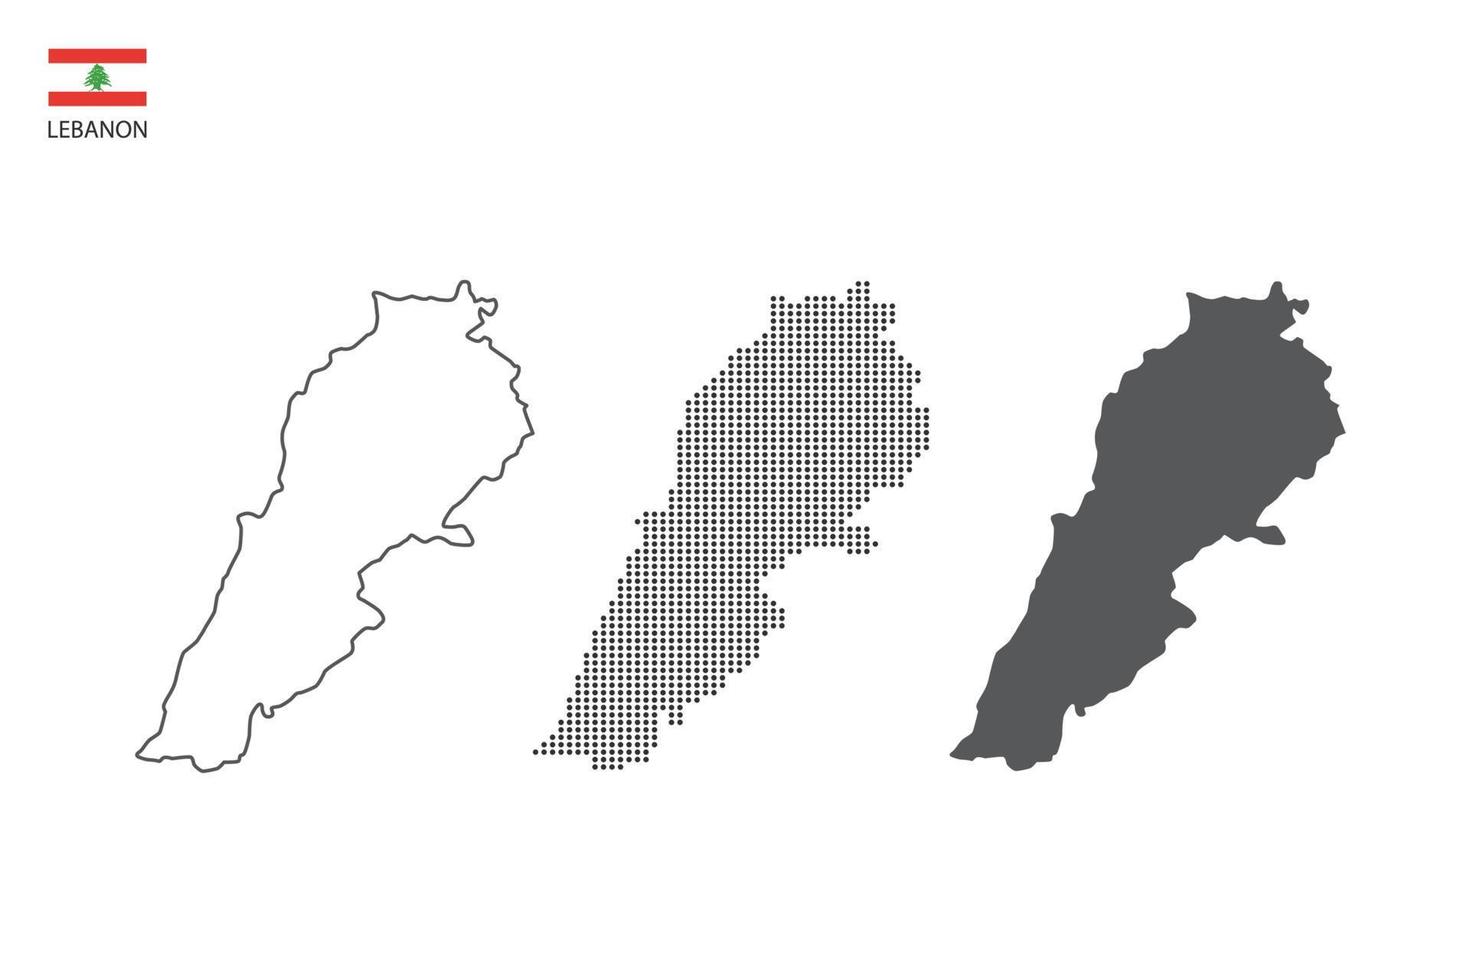 3 versions of Lebanon map city vector by thin black outline simplicity style, Black dot style and Dark shadow style. All in the white background.